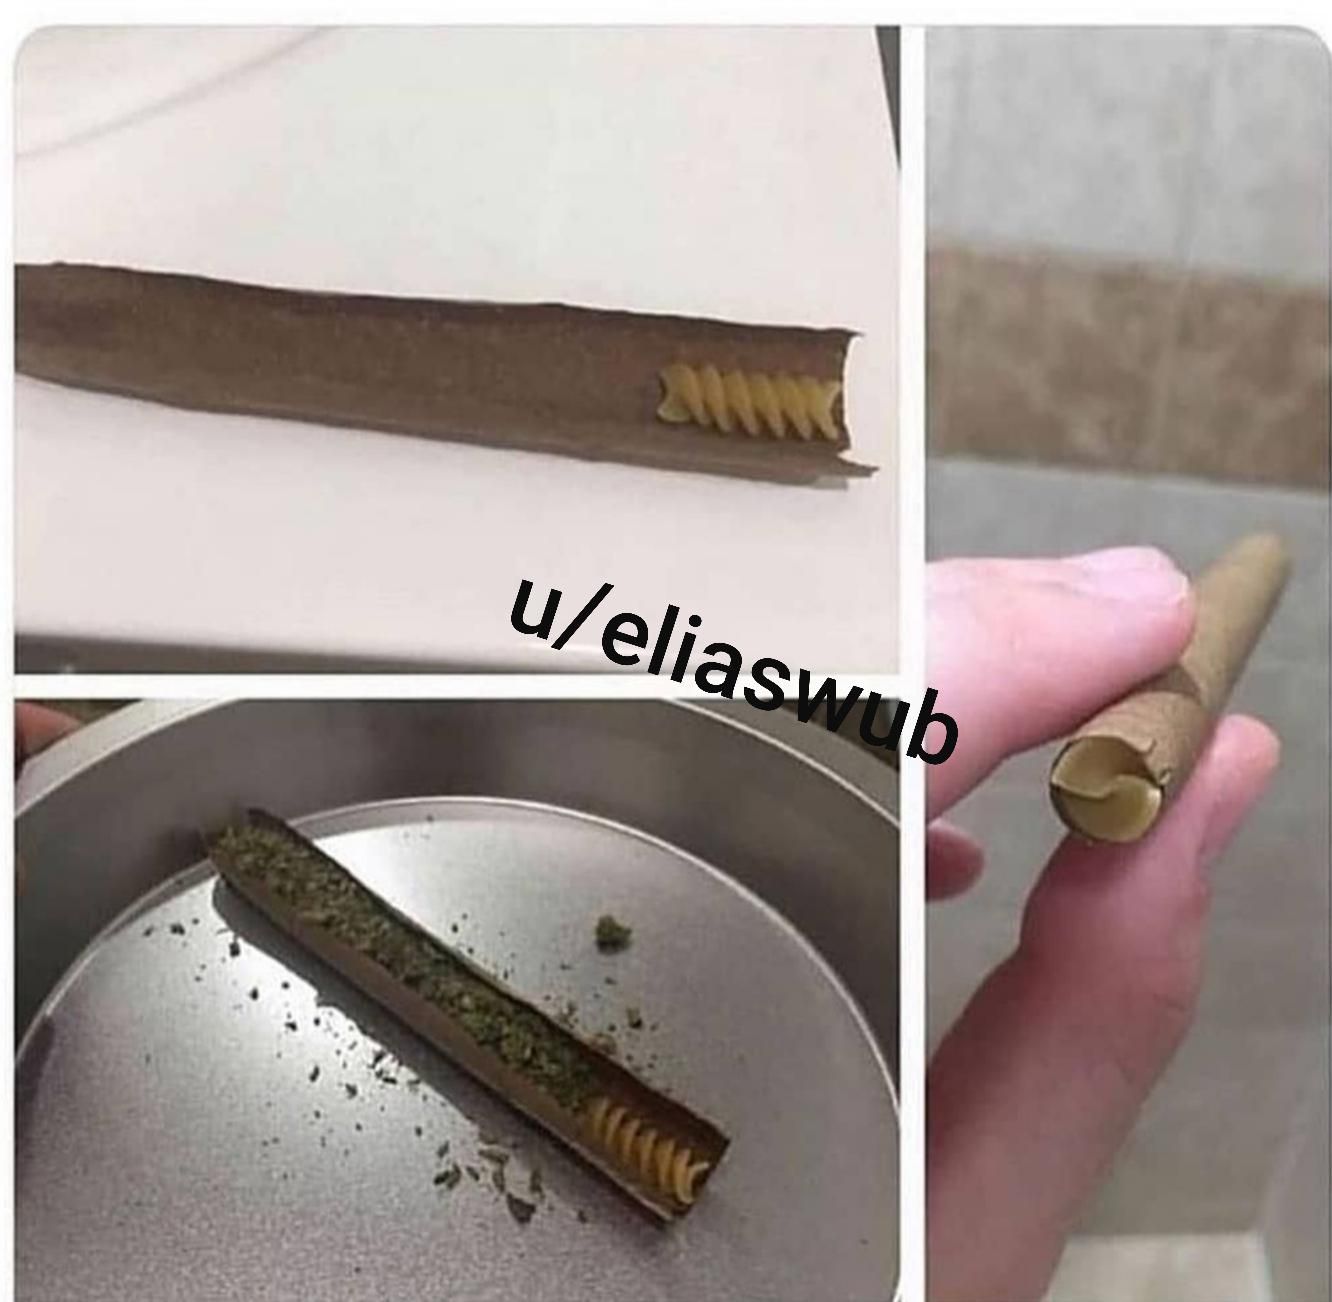 How people from italy smoke weed